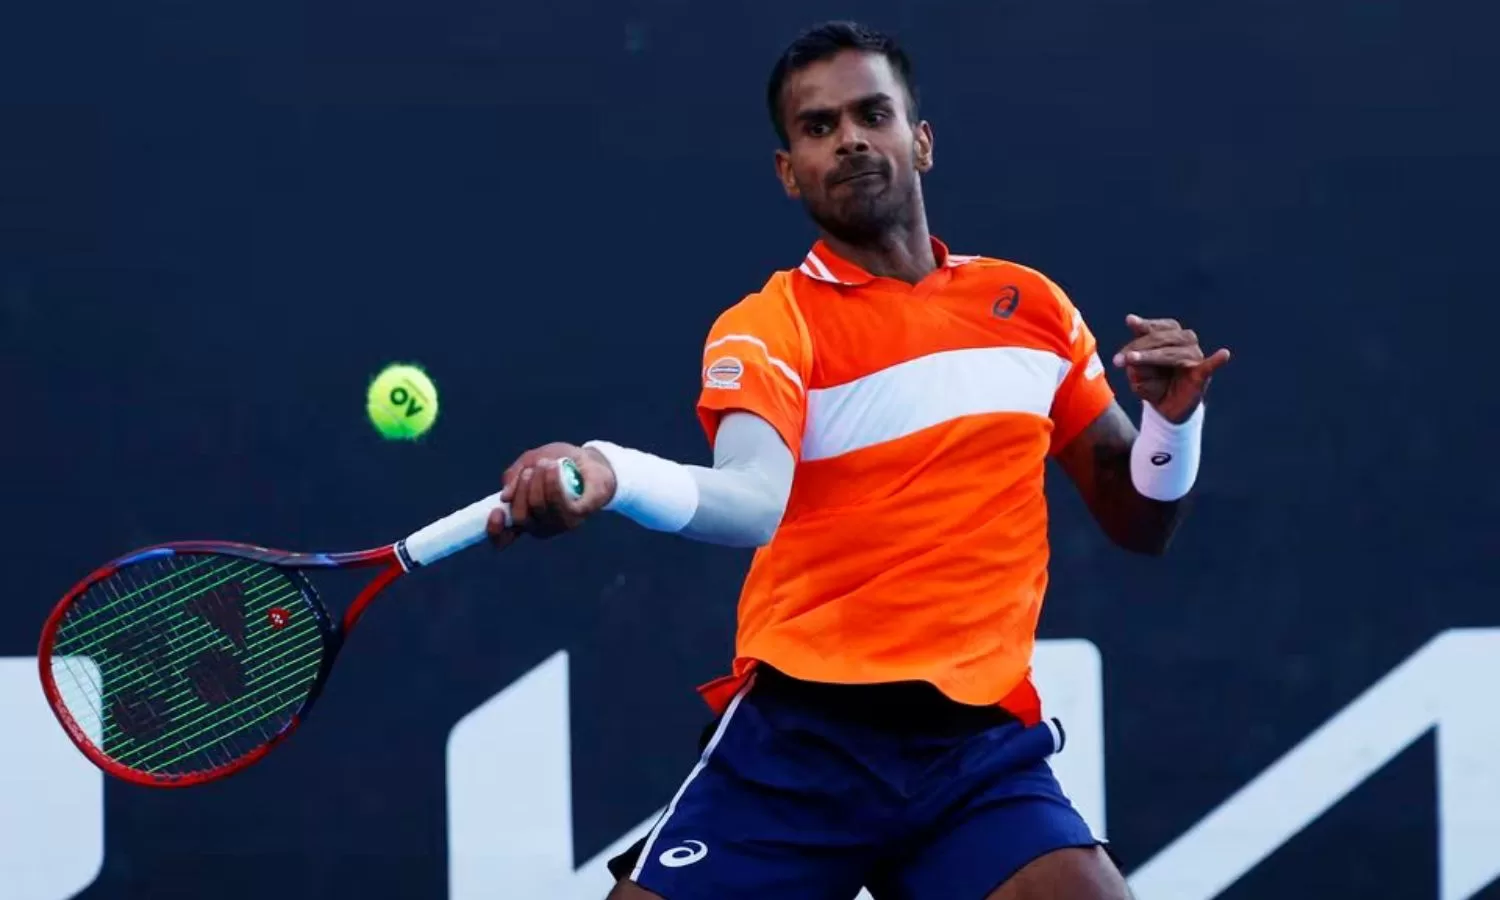 Sumit Nagal wins at Miami Open on debut, enters top 100 ranking